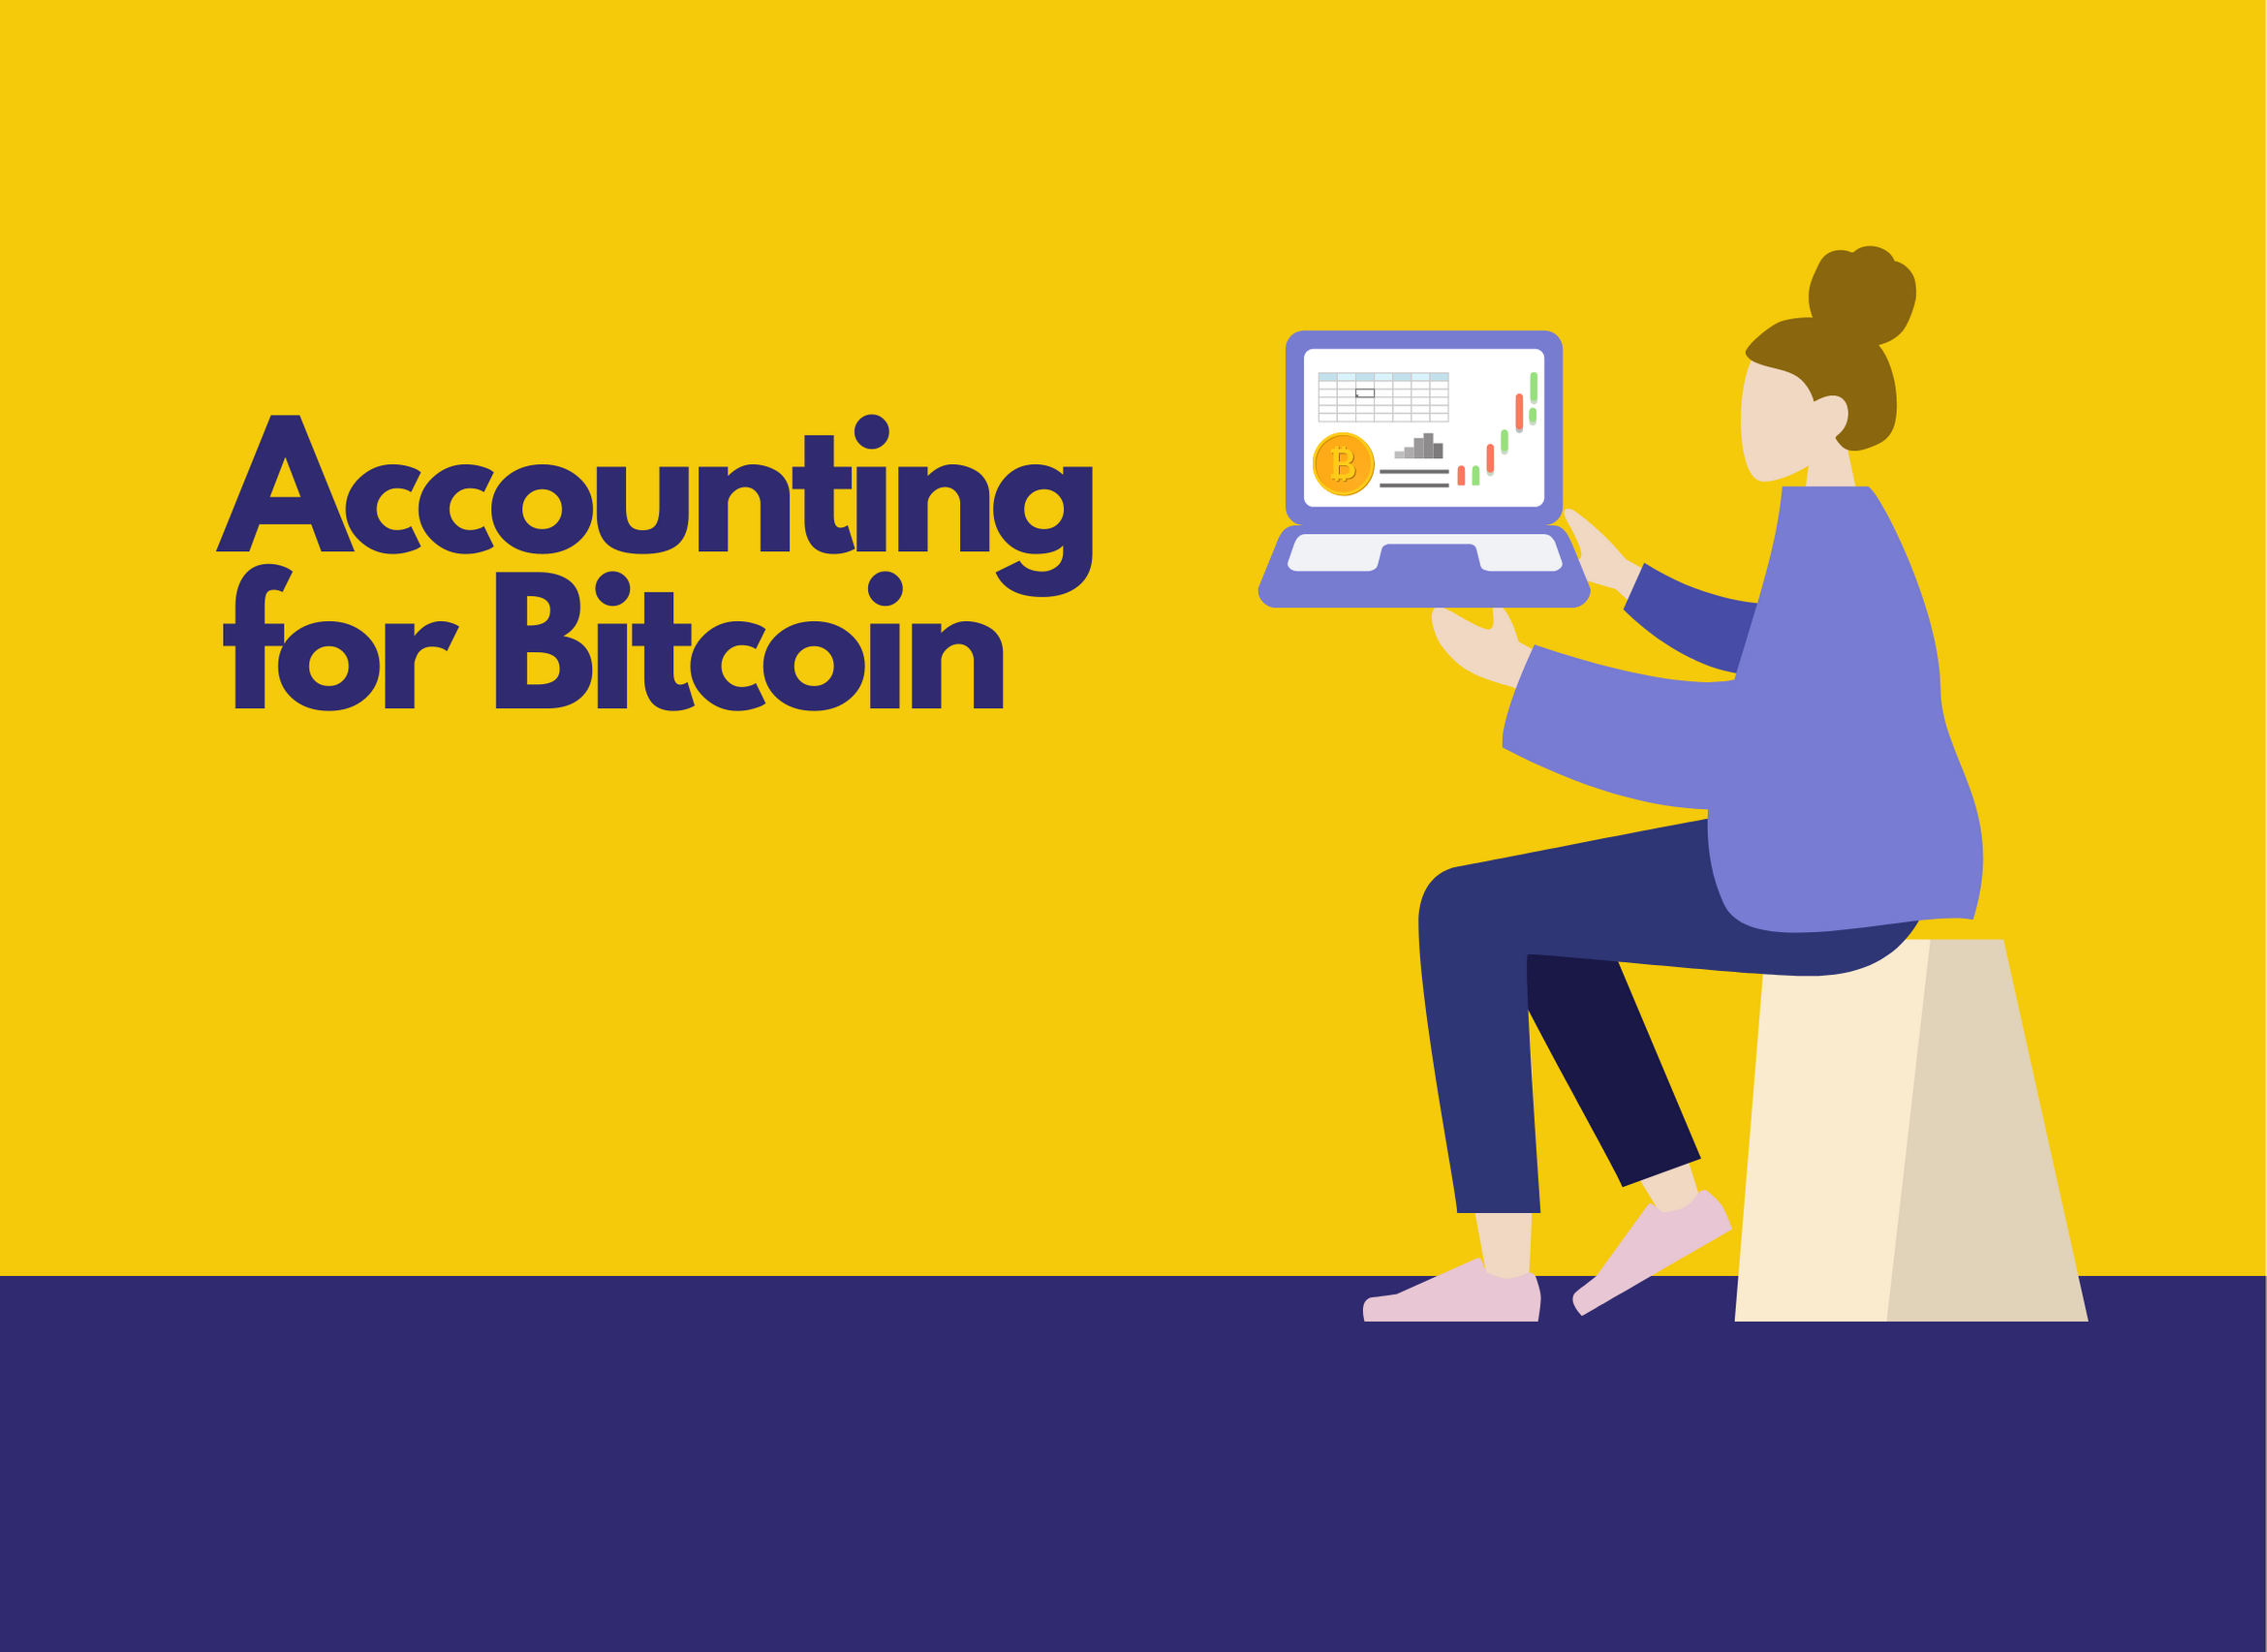 BTC Accounting: 10 Things You Need to Know About Your Bitcoin Transactions